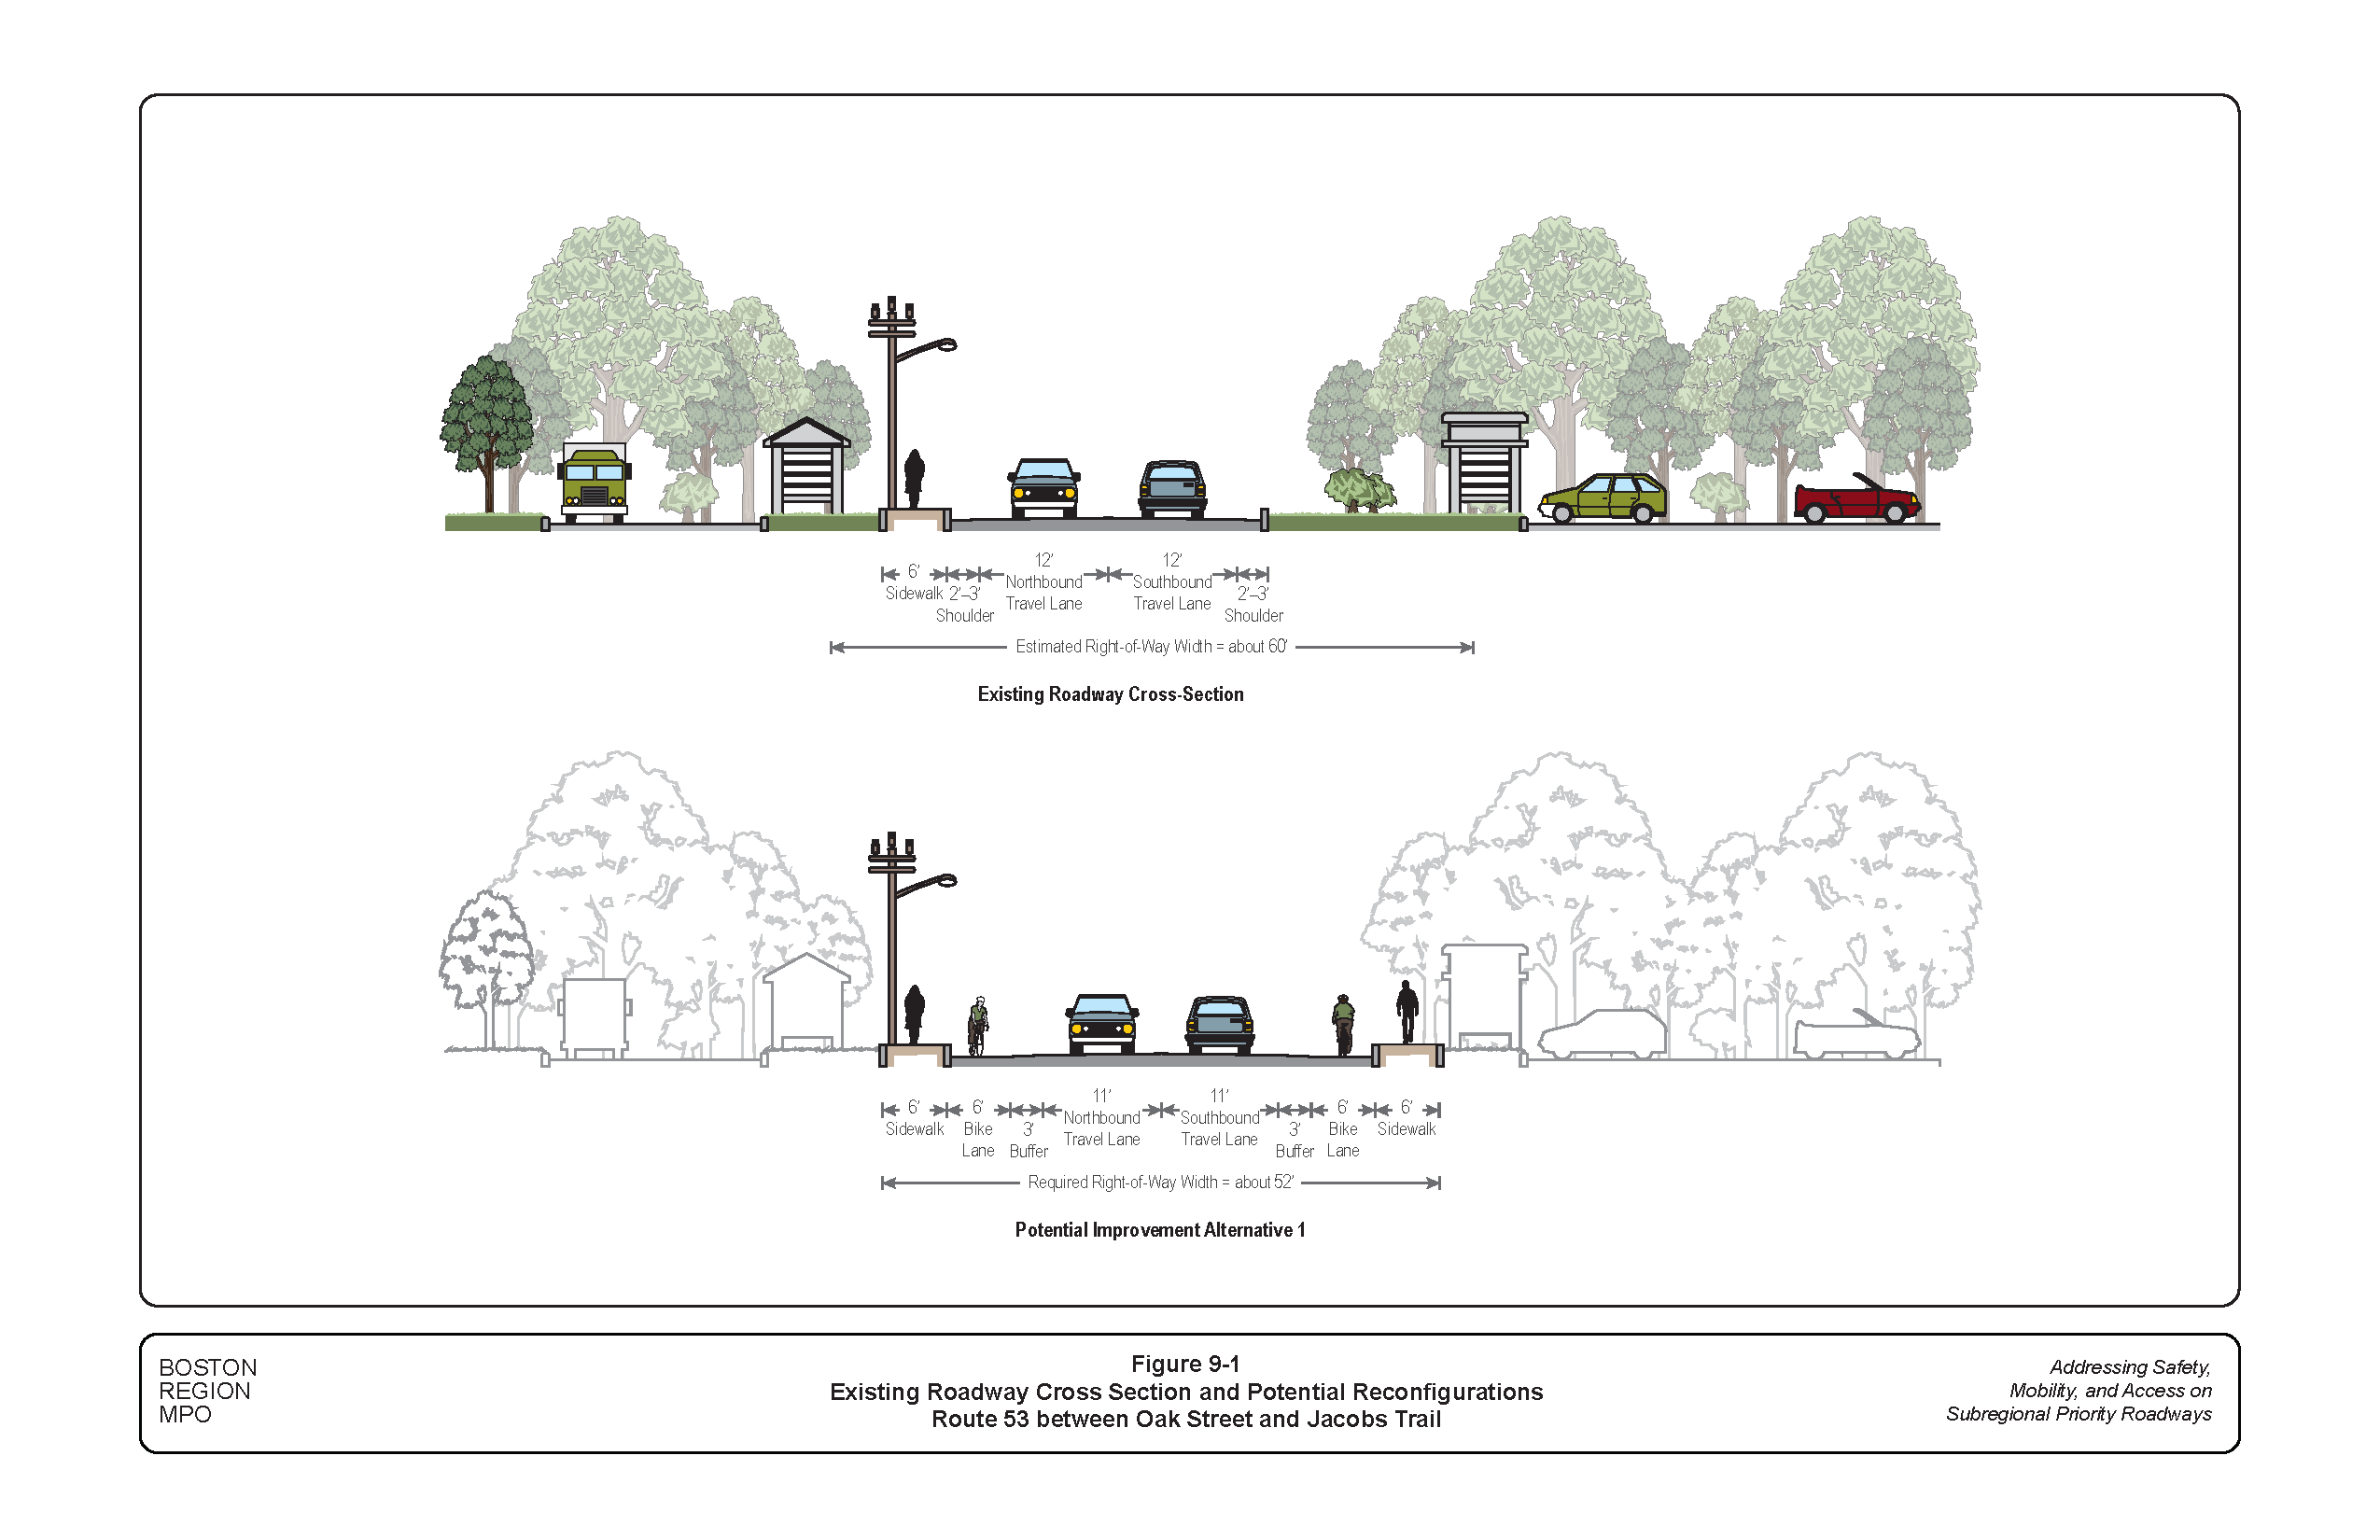 These two figure shows the existing roadway cross section of Route 53 between Oak Street and Jacobs Trail and potential reconfiguration alternatives to accommodate all users of the roadway, including people who walk and people who bike.